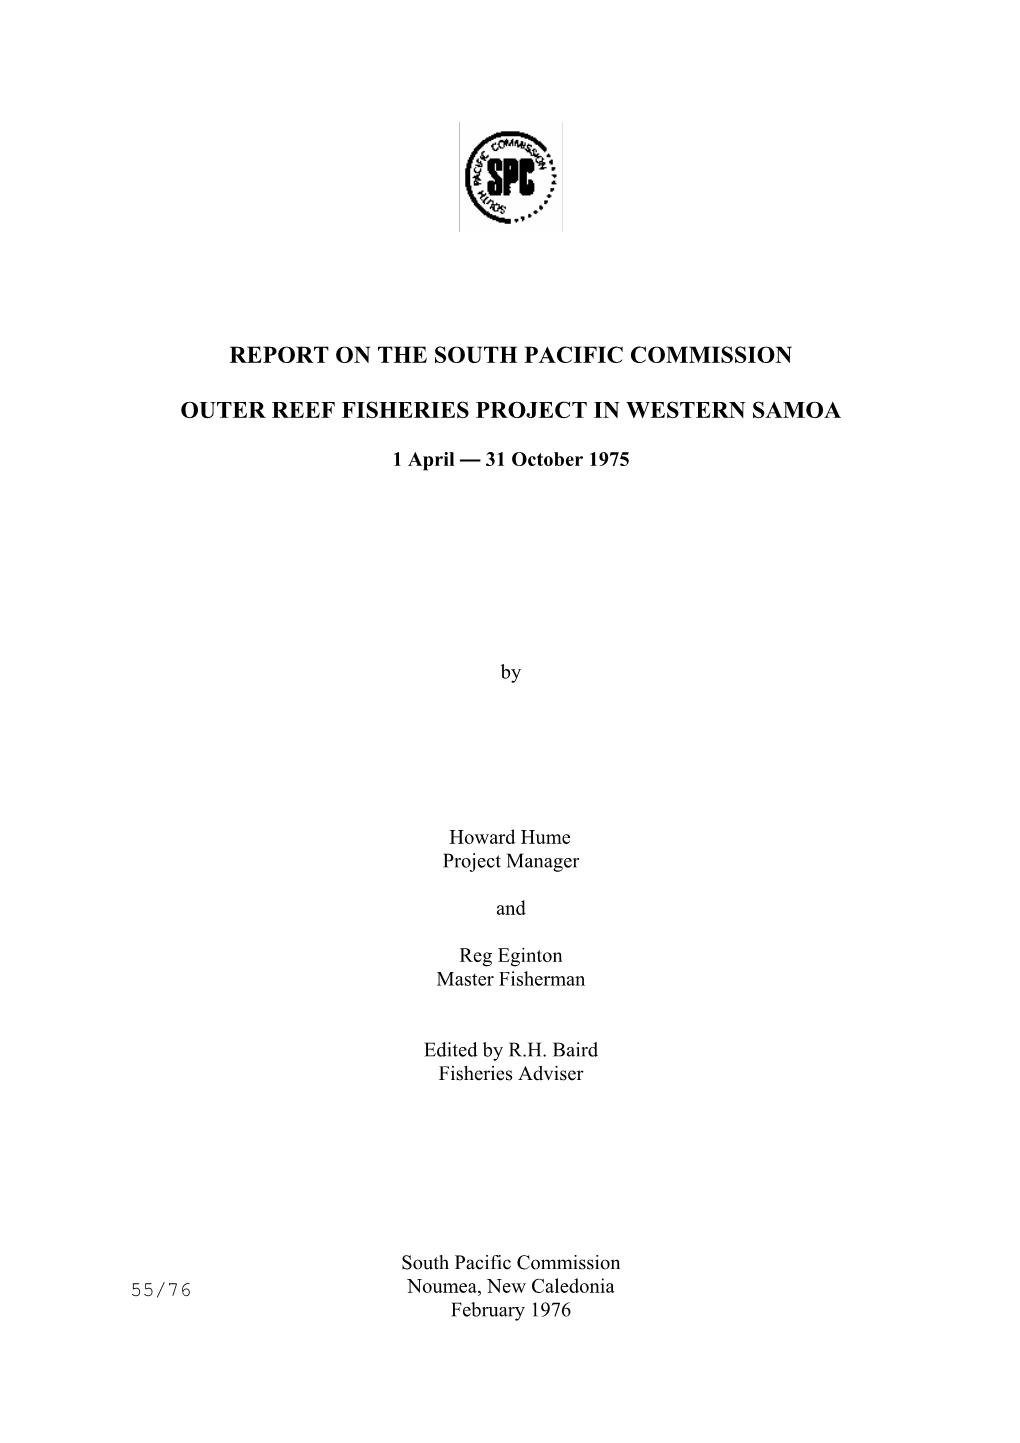 Report on the South Pacific Commission Outer Reef